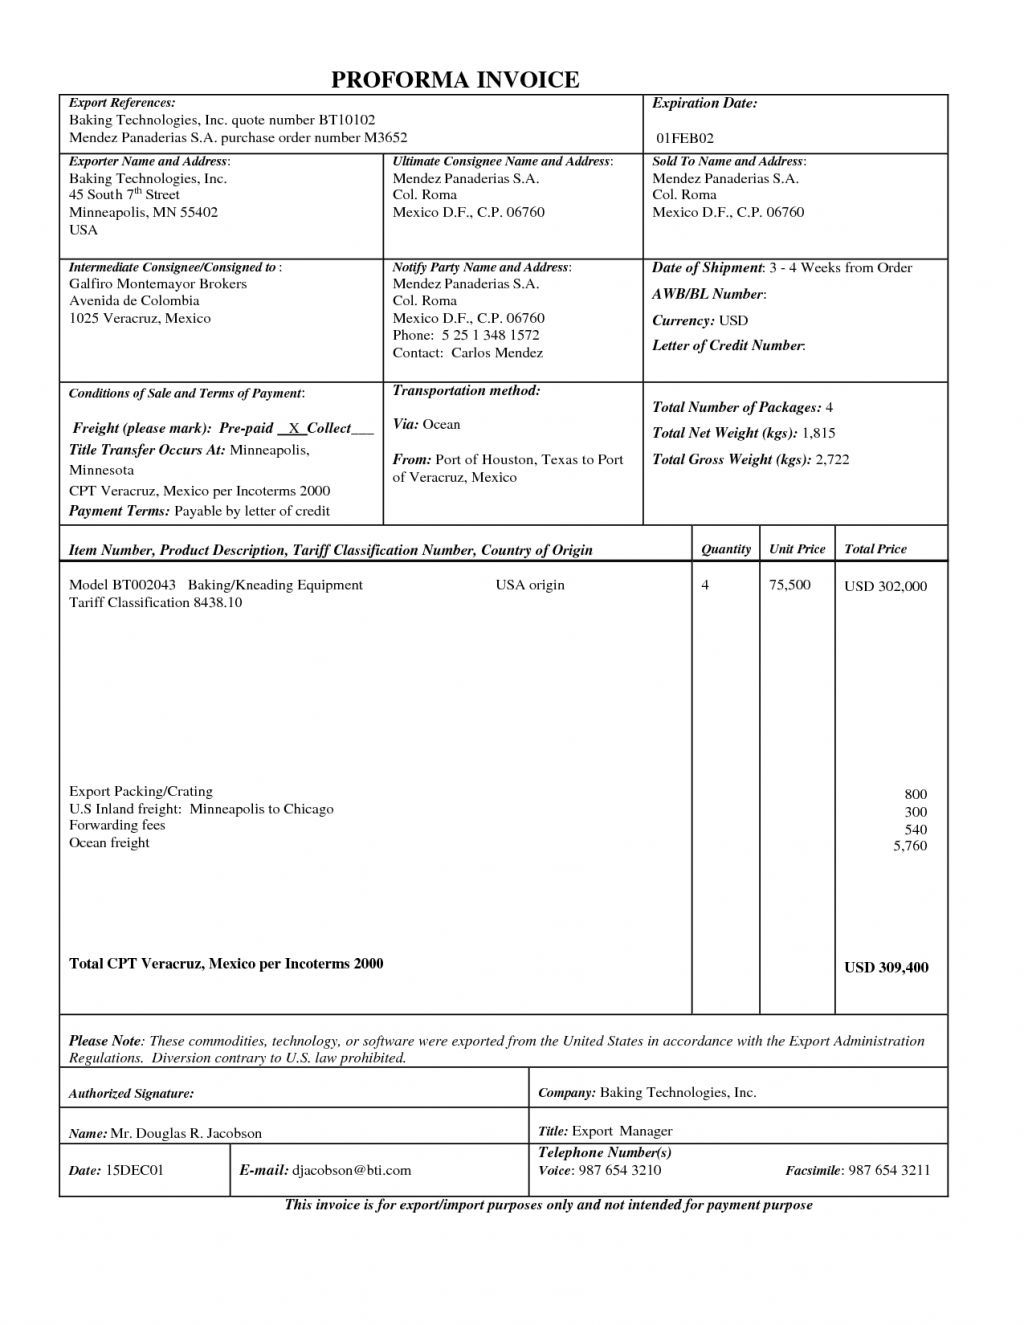 sample export invoice export proforma invoice excel invoice images of export invoice